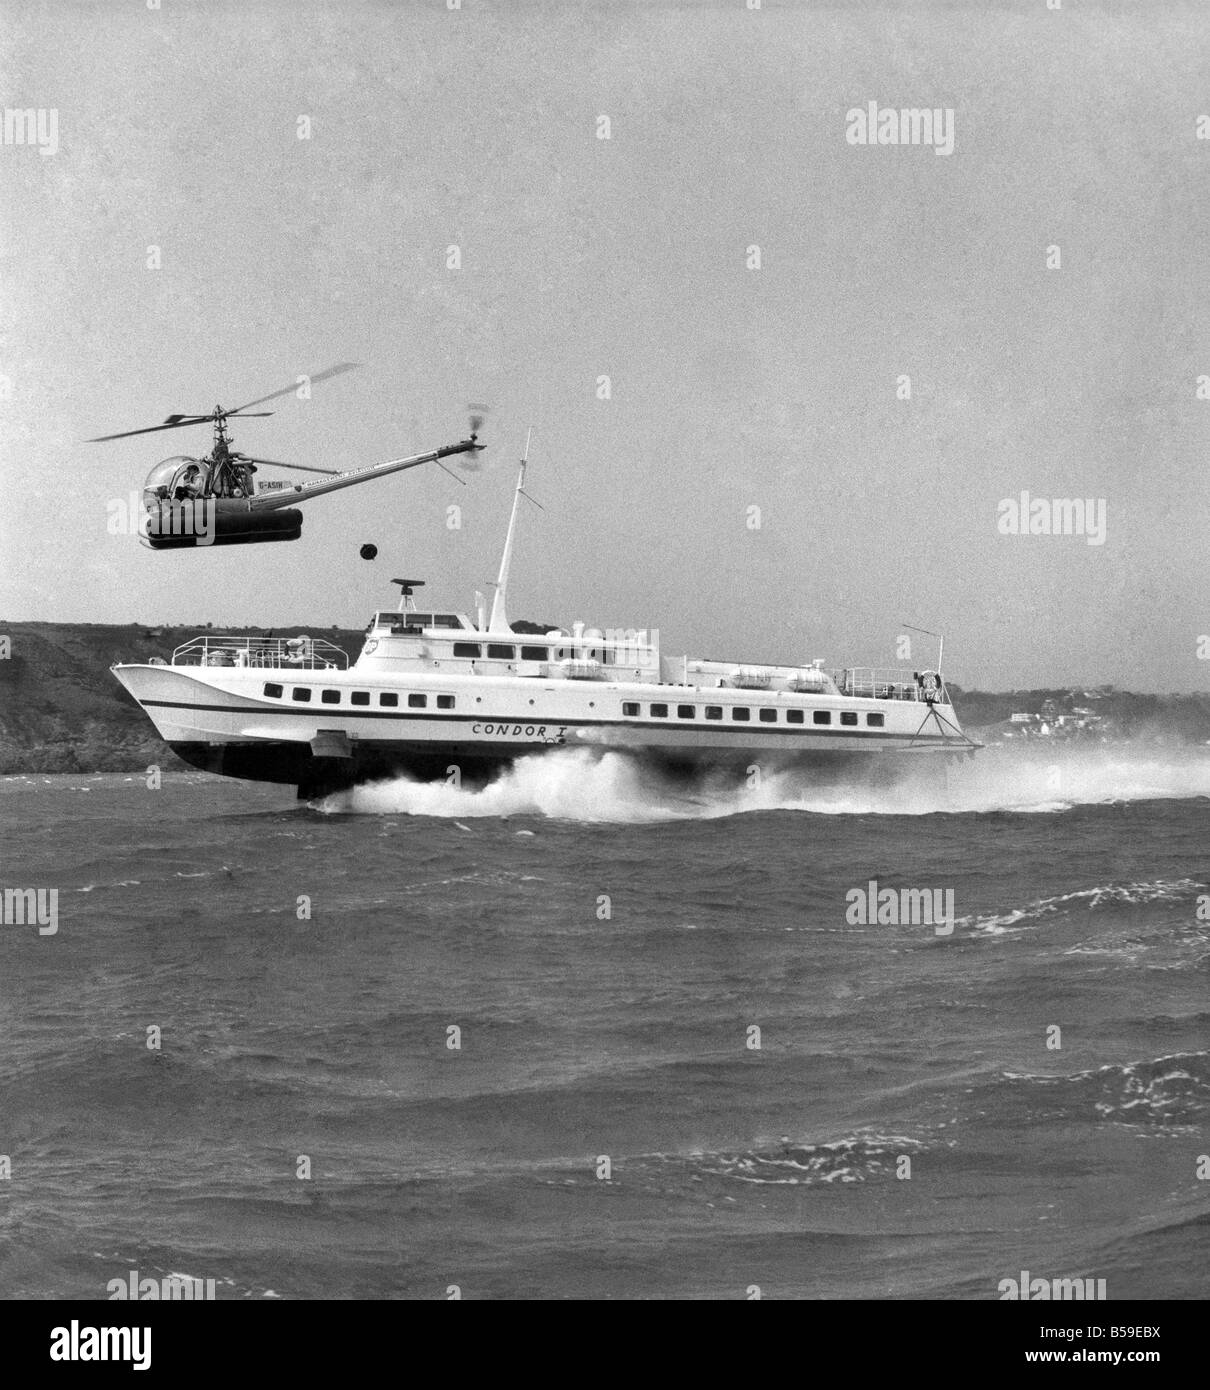 The Hydrofoil Condor 1 at sea of Jersey, overhead is a small helicopter. &#13;&#10;Circa 1969&#13;&#10;P005276 Stock Photo